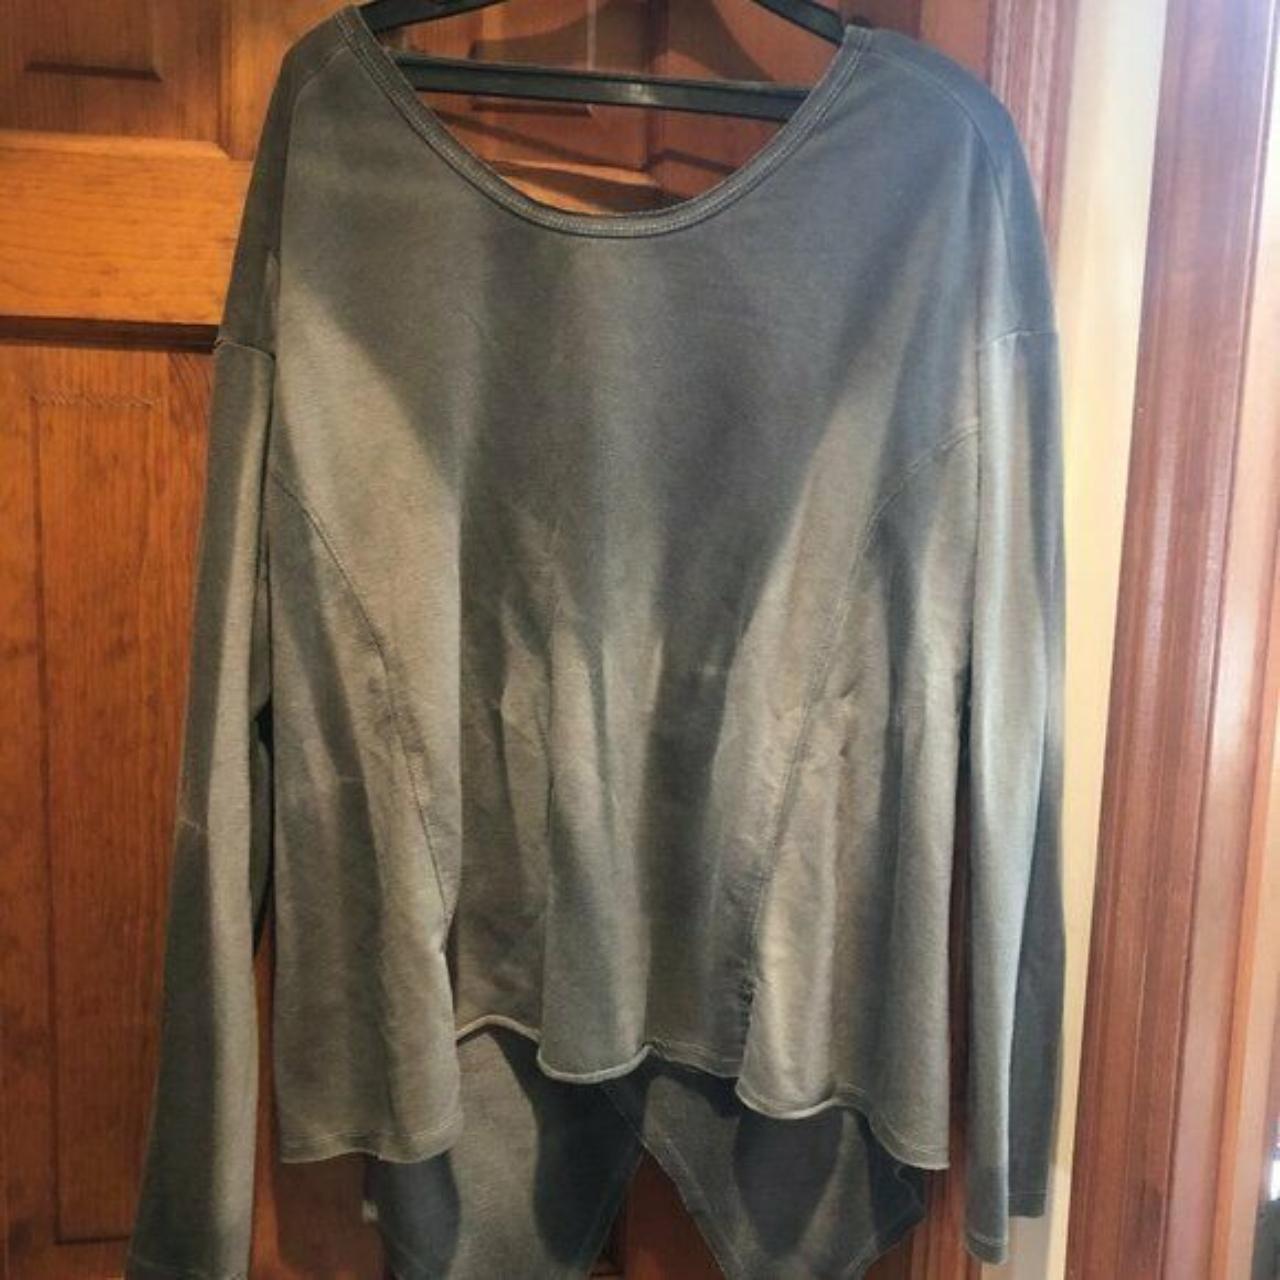 Product Image 1 - Flowy, faded gray Women's top